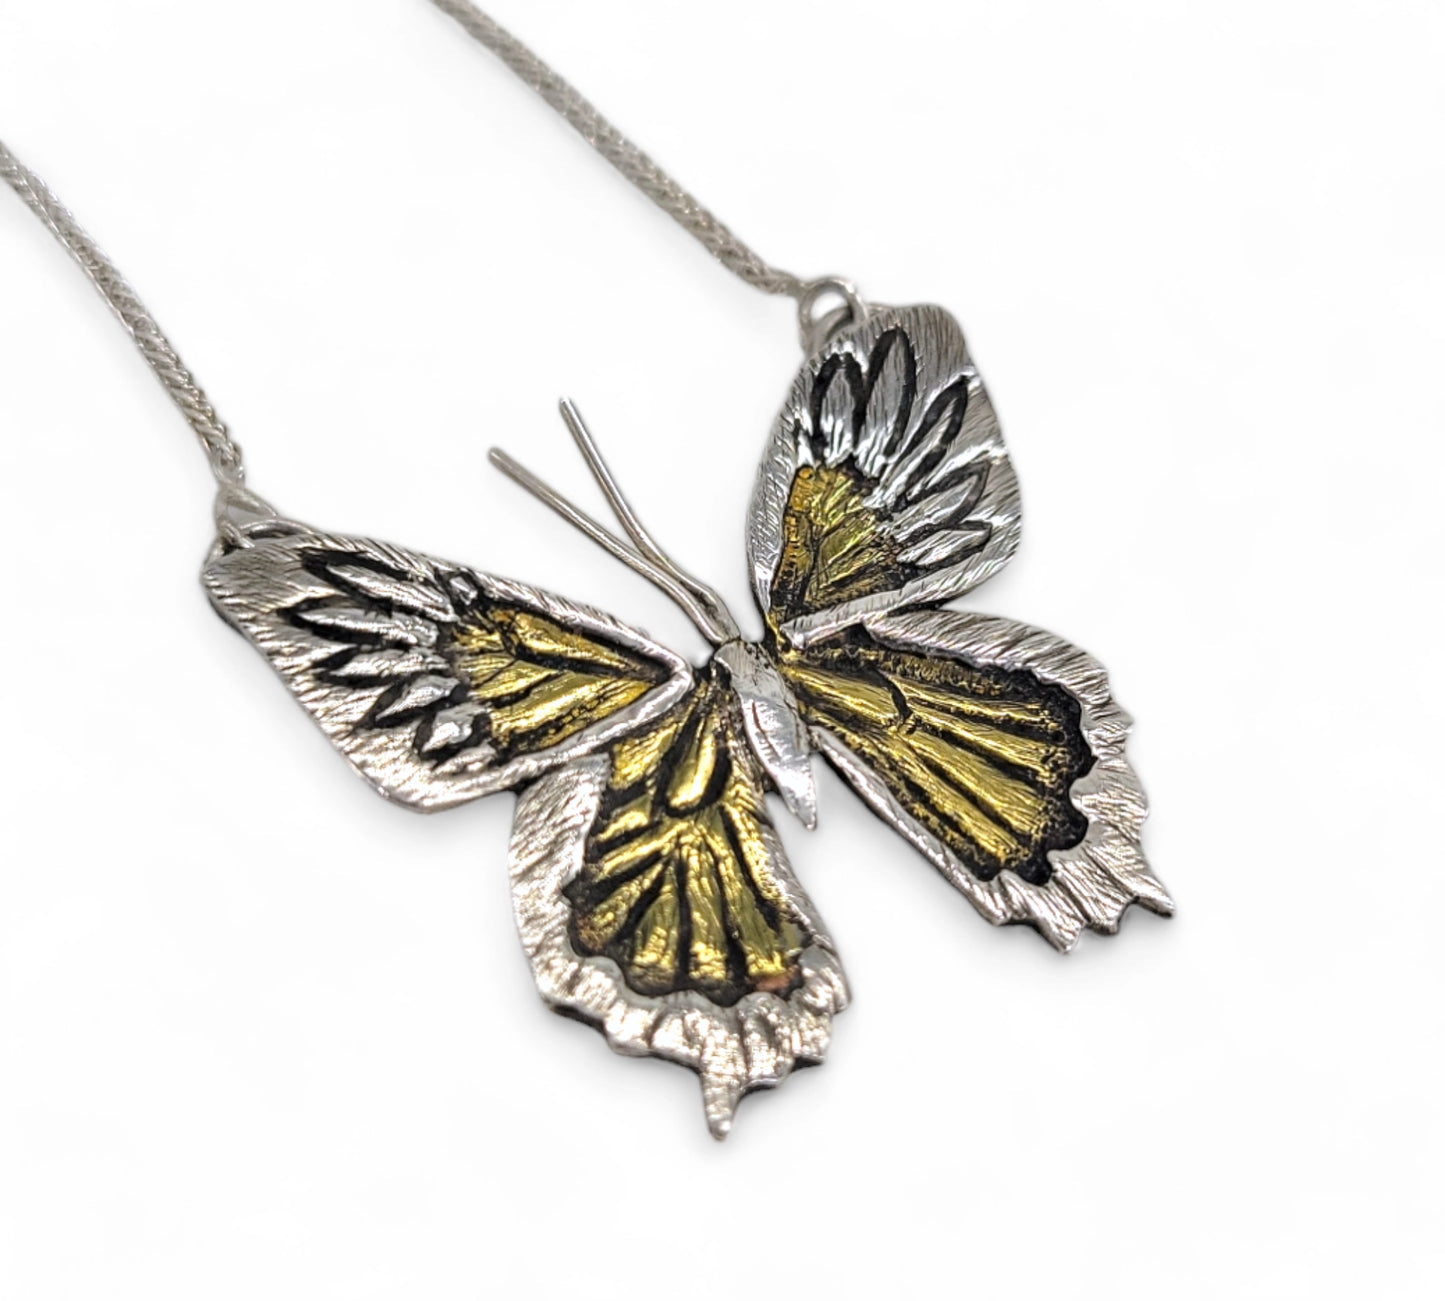 one of a kind butterfly necklace handmade by Jaclyn Nicole. Unique Pendant made in Sterling Silver and brass